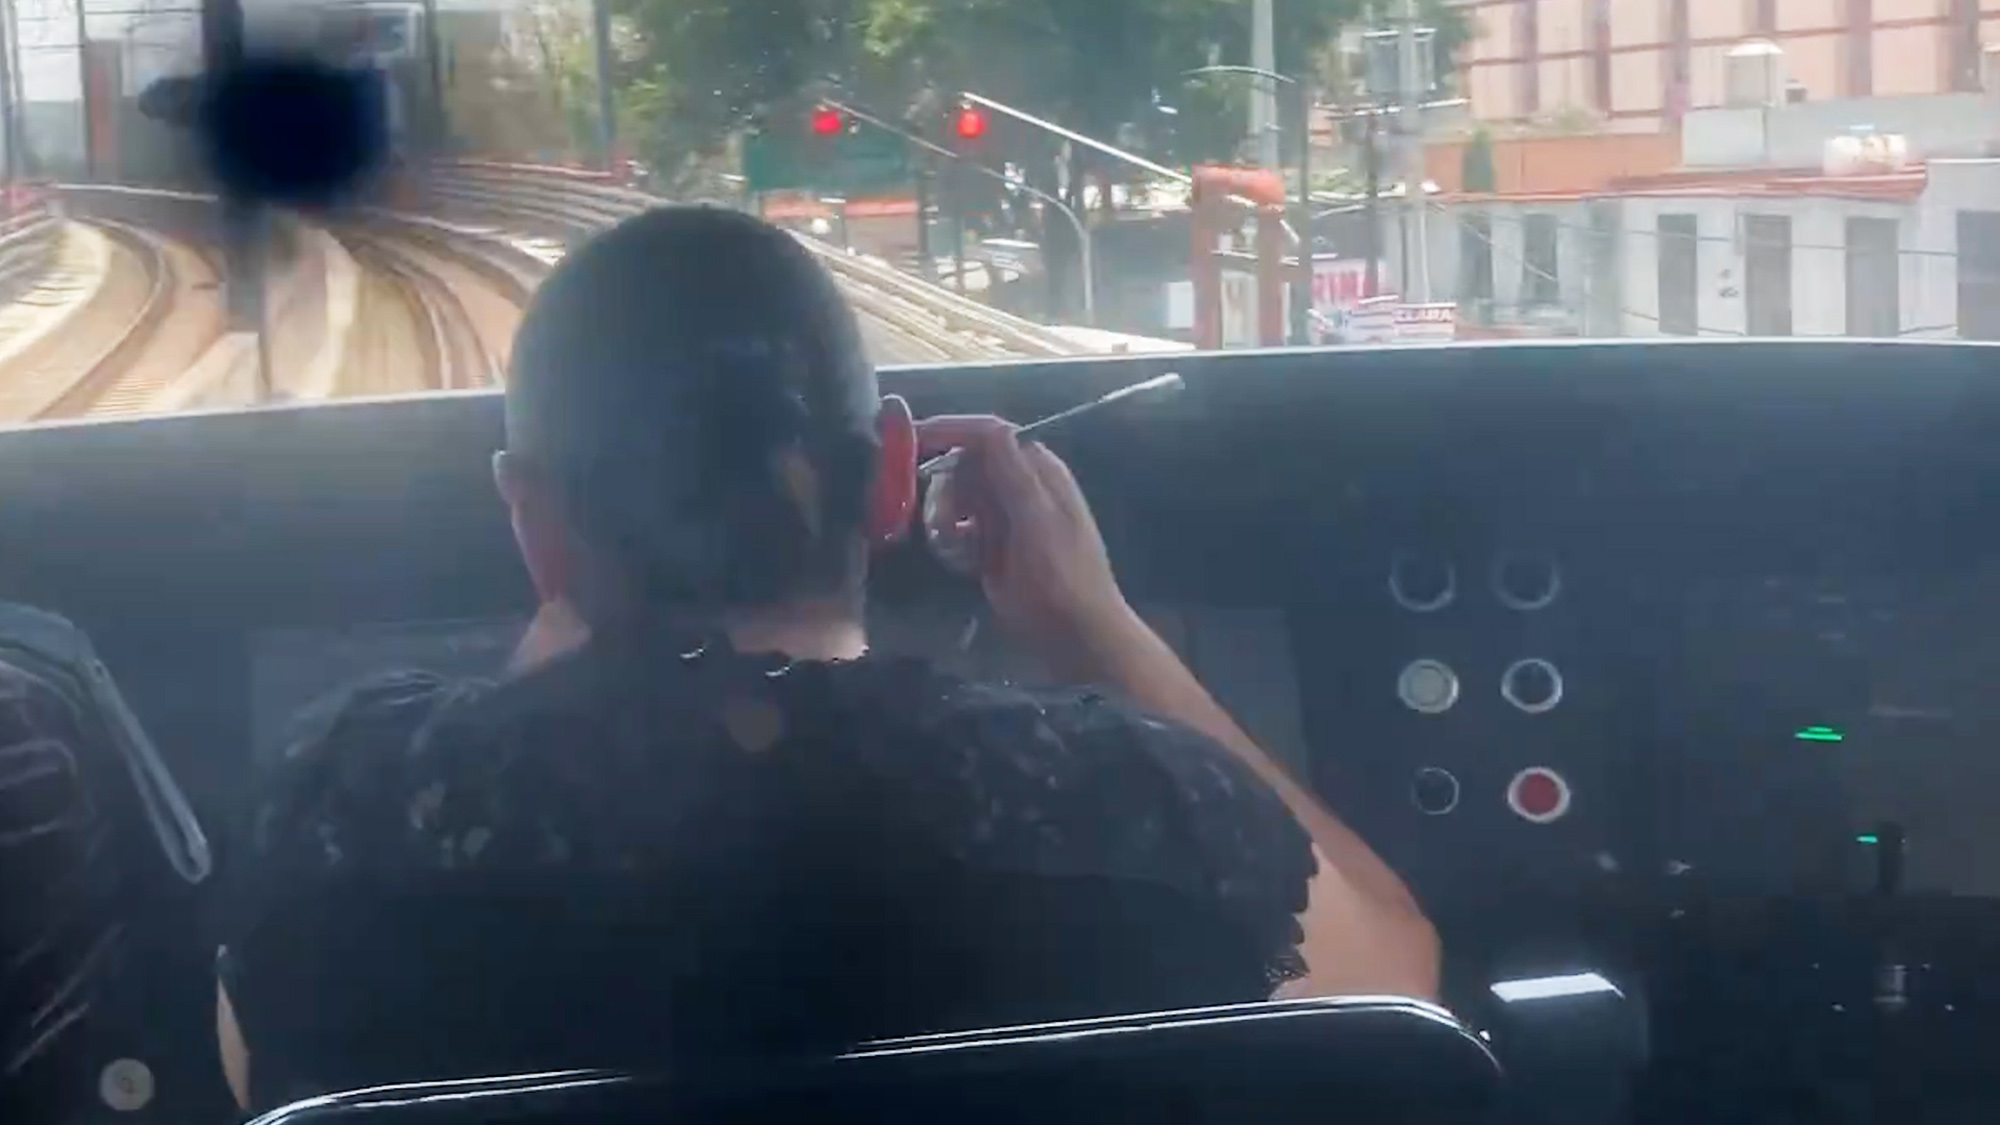 Read more about the article  Female Tube Driver Filmed Putting On Make-Up At Controls